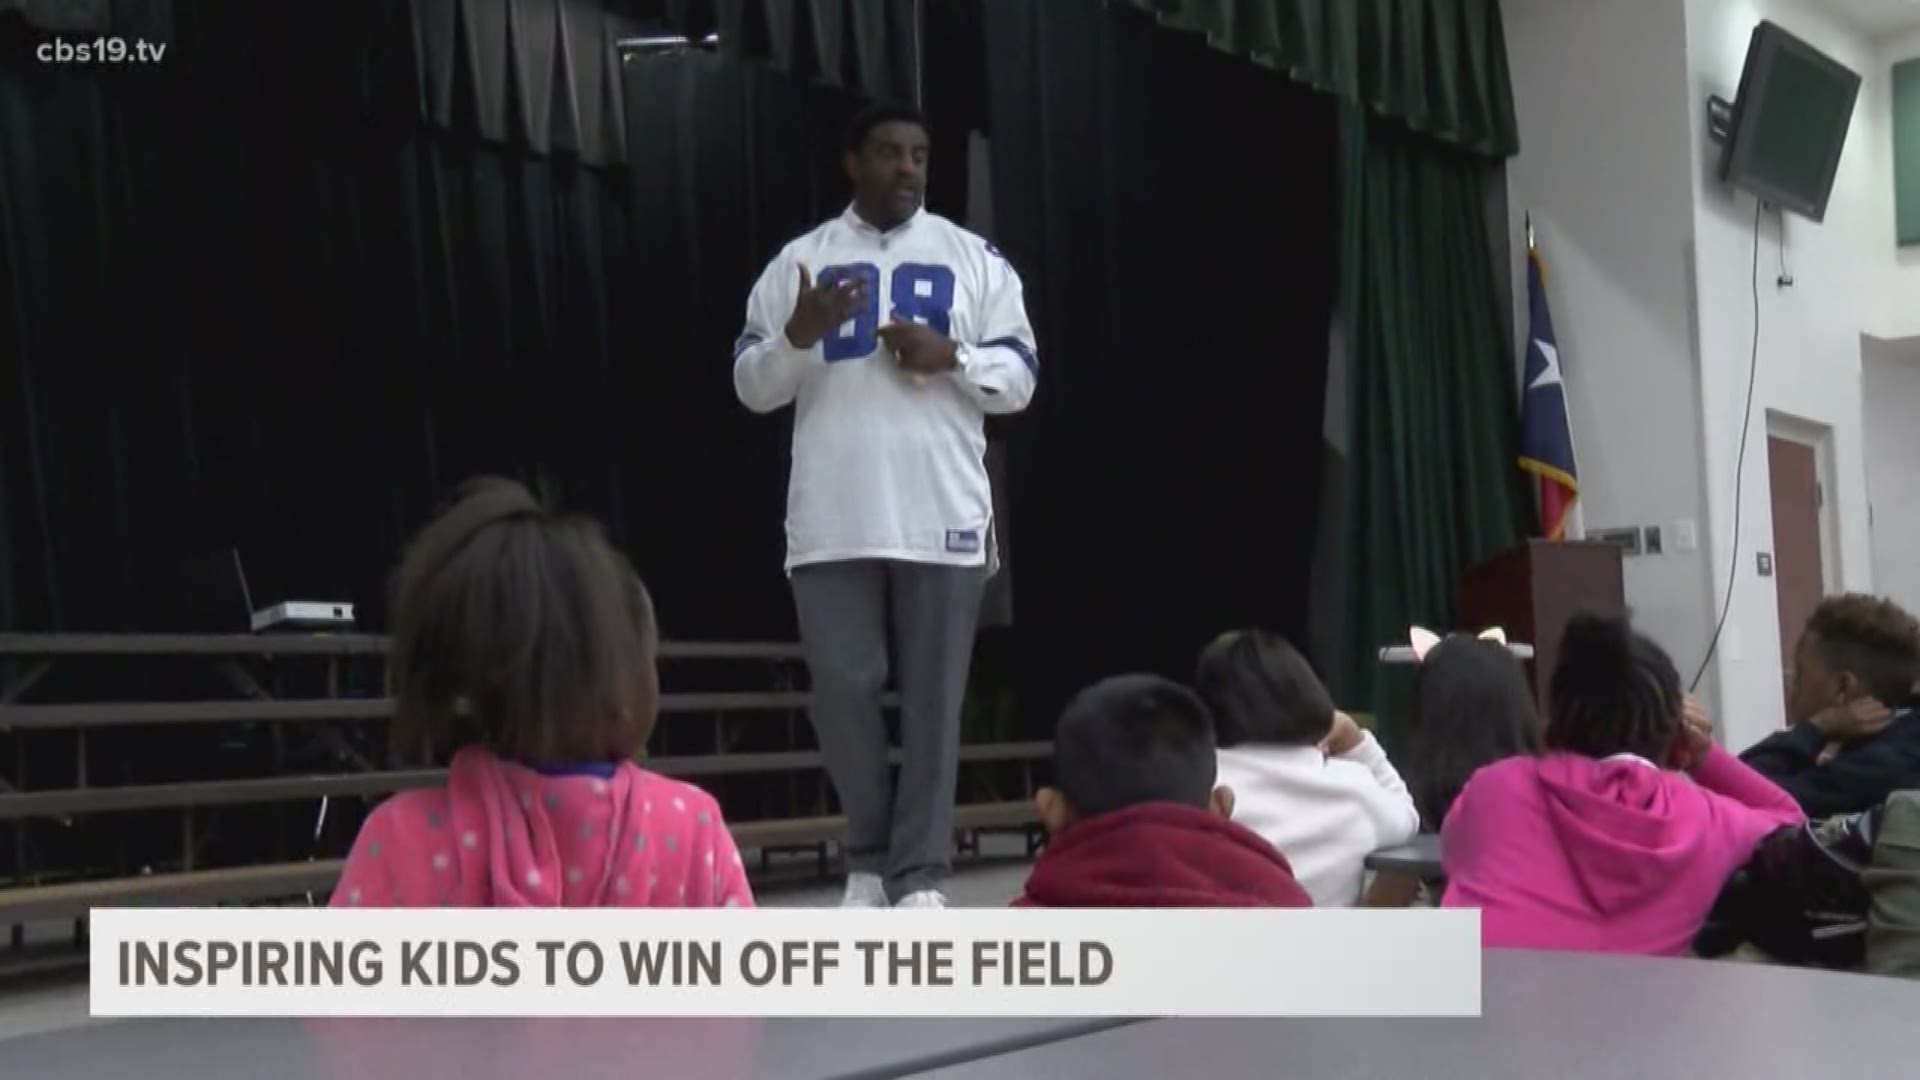 Former Dallas Cowboy Greg Ellis spoke to kids at Tyler to promote his stage play and positively inspire kids.